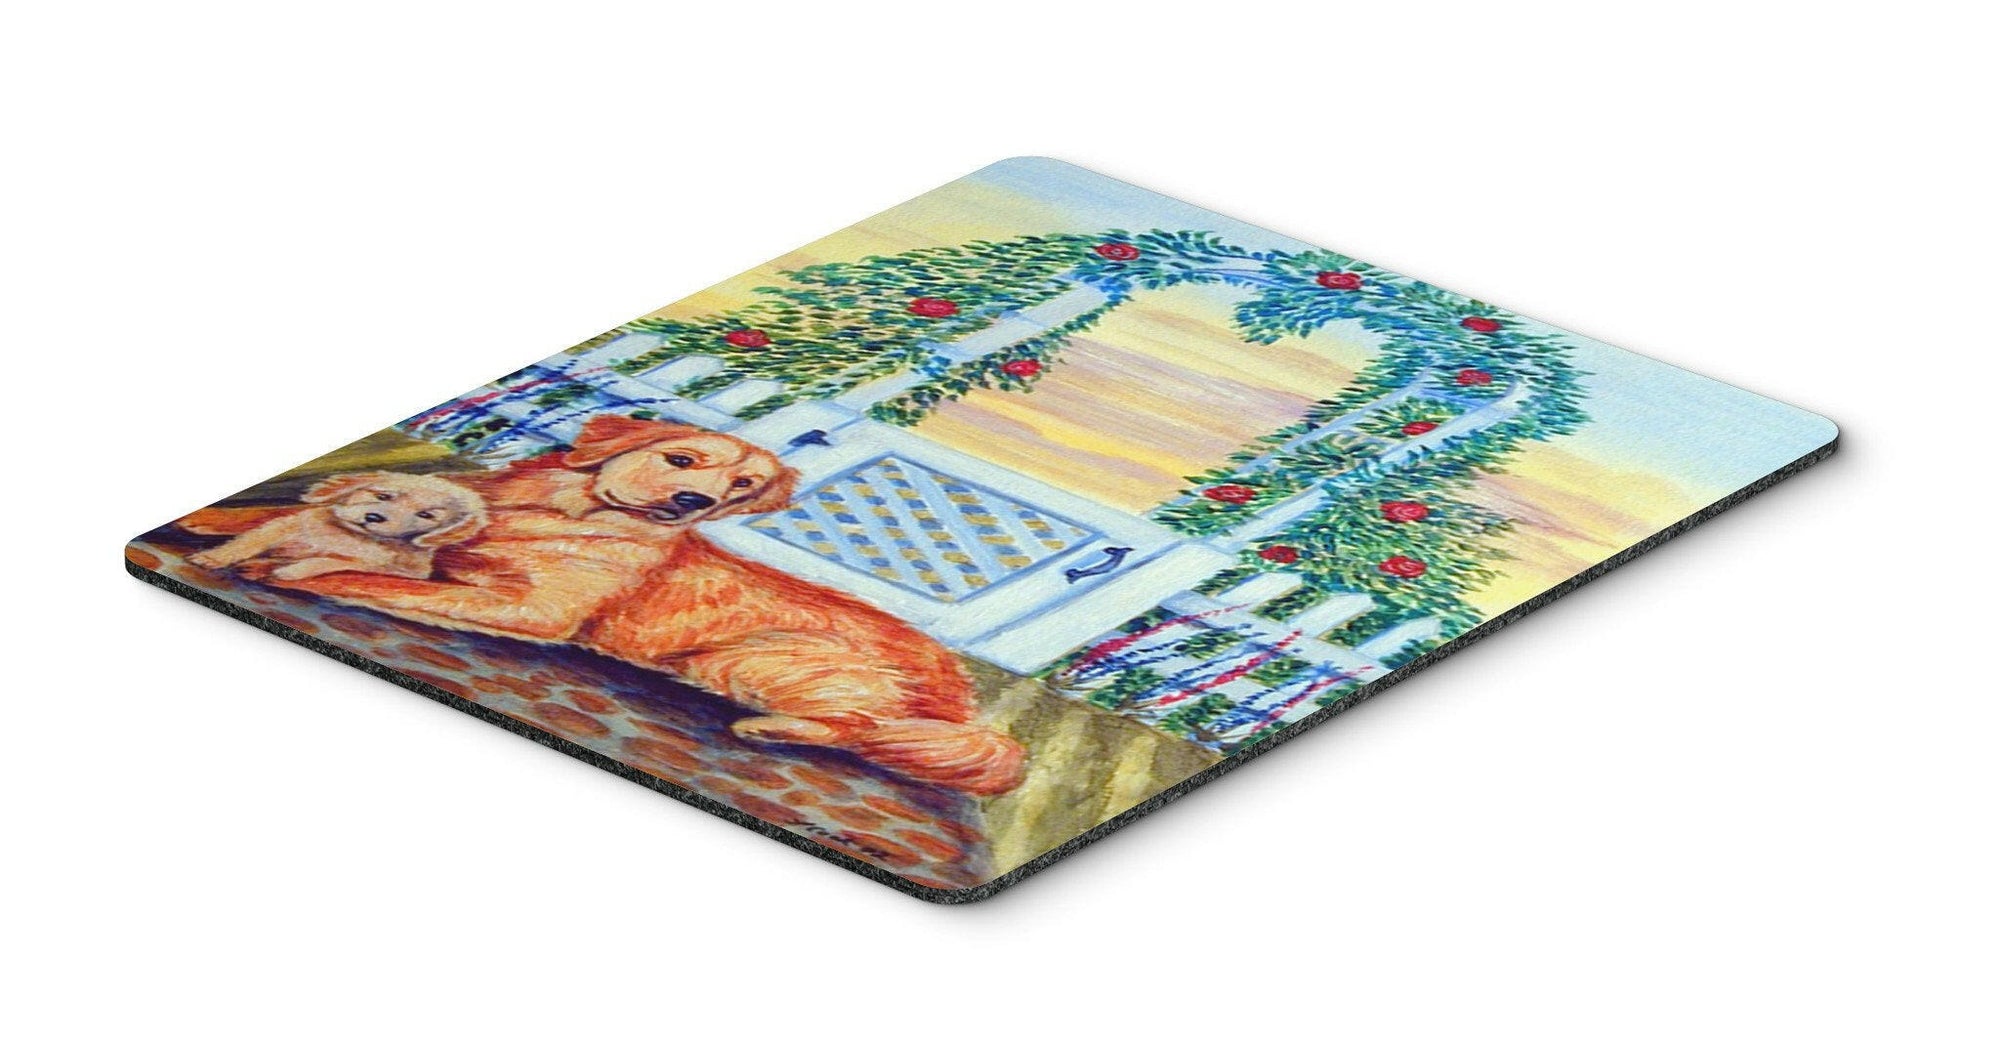 Golden Retriever with puppy at the gate Mouse Pad / Hot Pad / Trivet by Caroline's Treasures